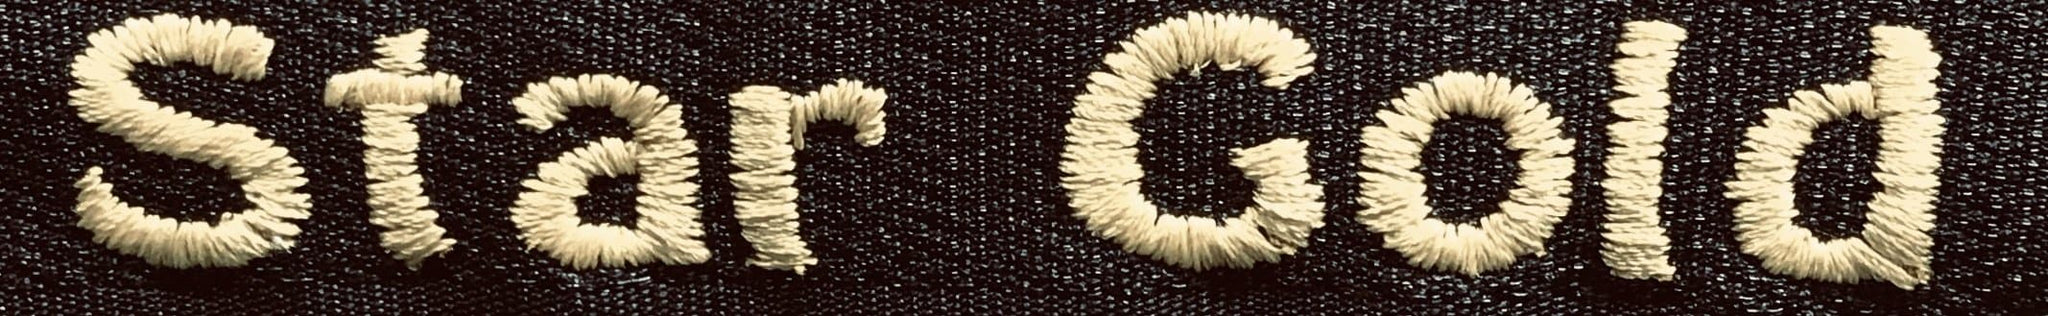 star gold embroidery example